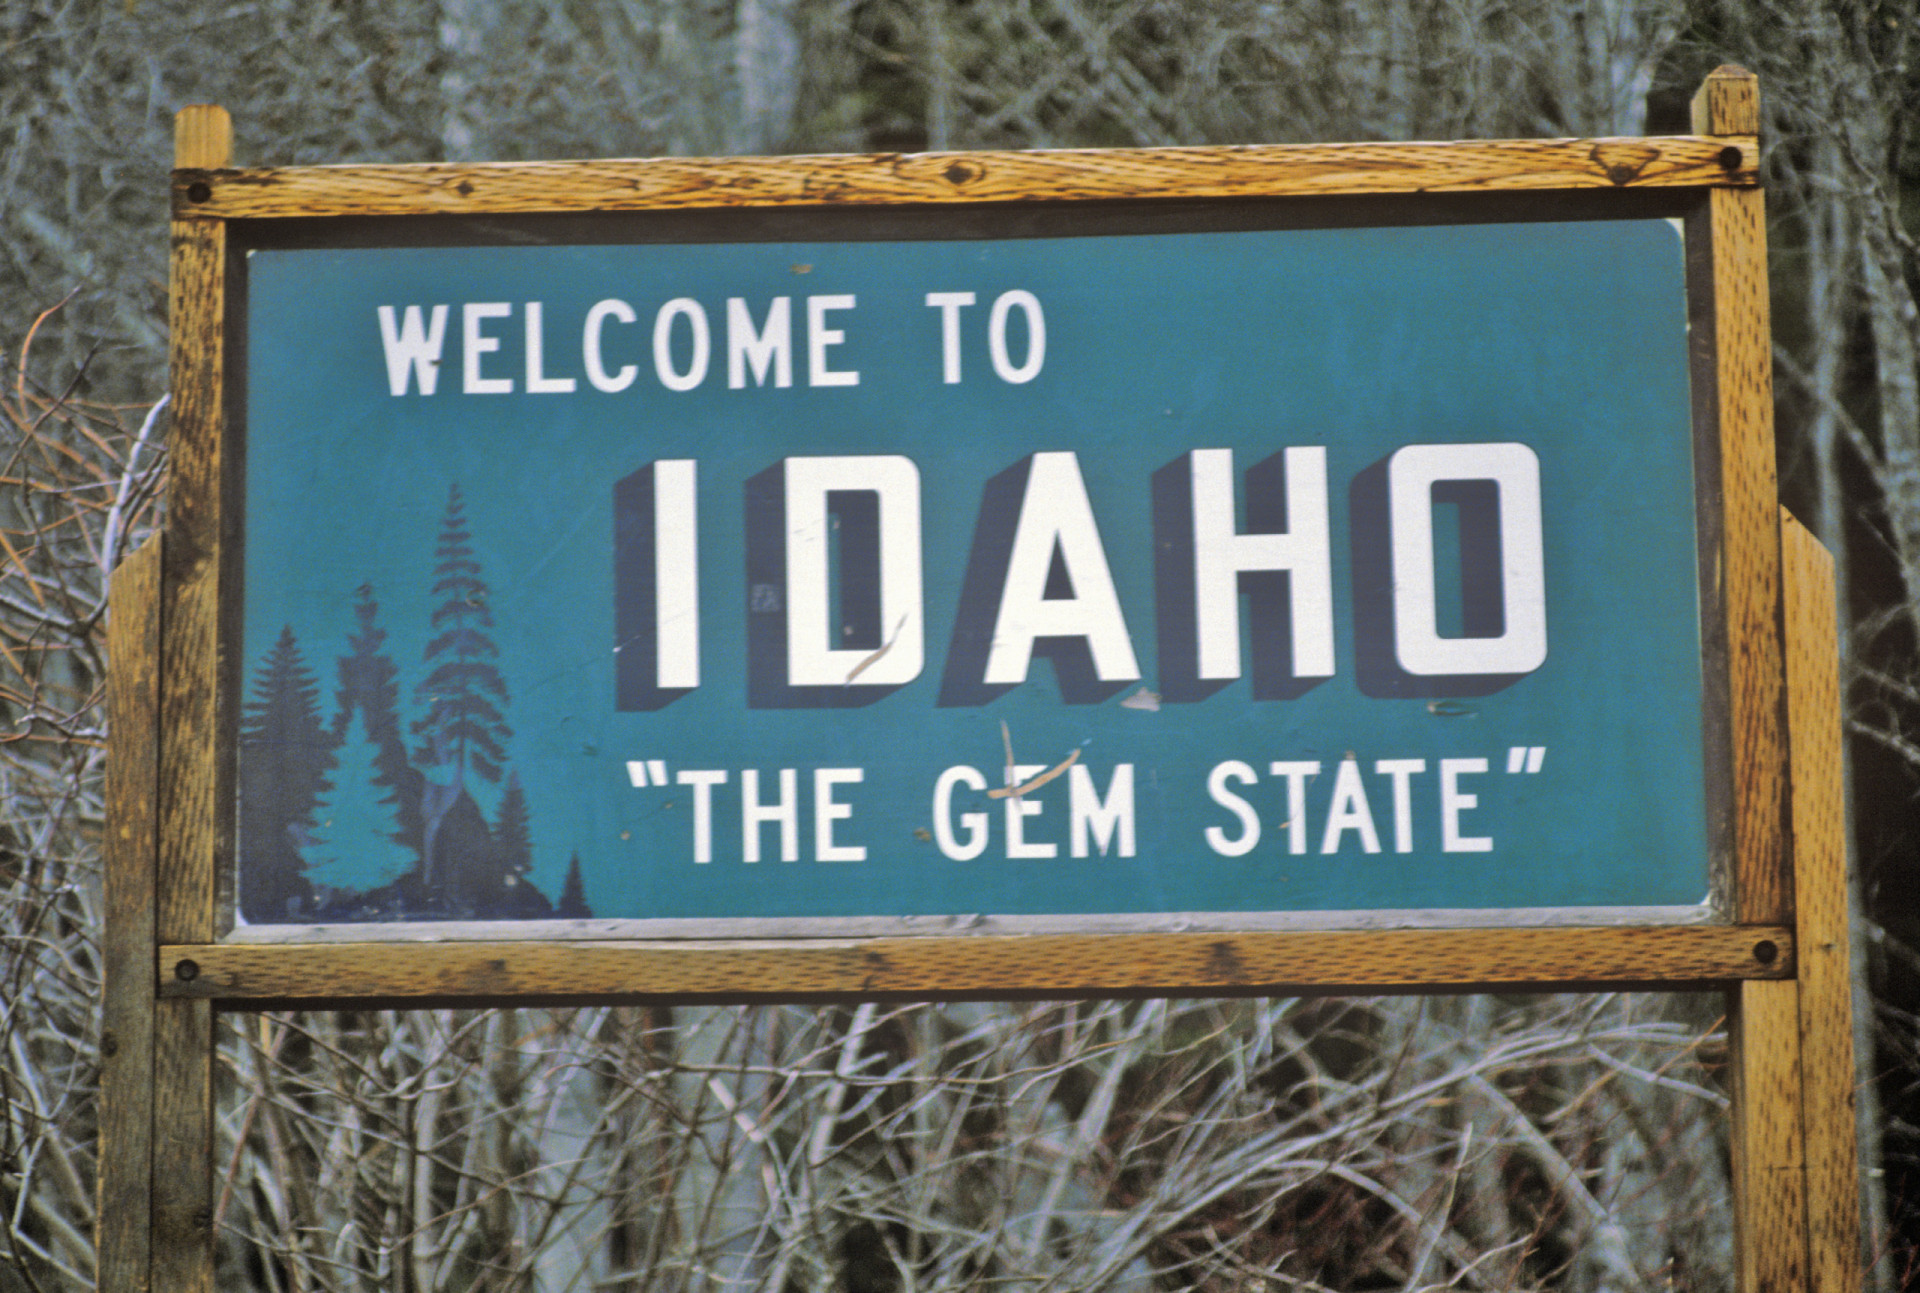 <p>Idaho is known as the Gem State because it's home to a number of different minerals. The slogan is also used as a figurative expression for Idaho's natural beauty. </p><p>You may also like:<a href="https://www.starsinsider.com/n/286504?utm_source=msn.com&utm_medium=display&utm_campaign=referral_description&utm_content=572689en-en"> Fascinating facts you didn’t know about Disney parks</a></p>